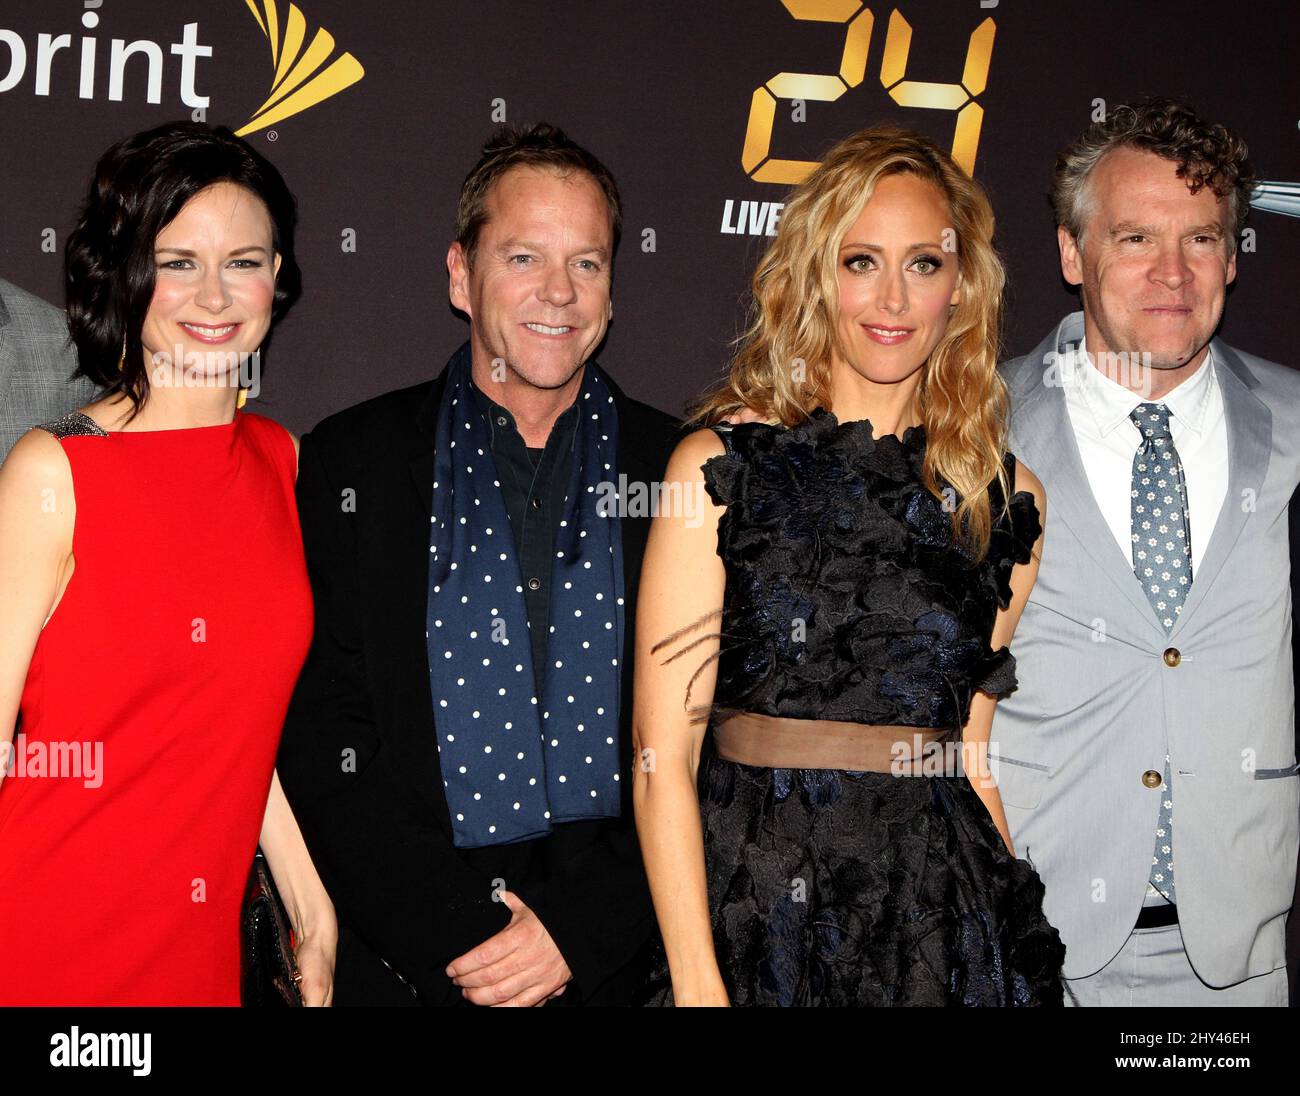 Mary Lynn Rajskub, Kiefer Sutherland, Kim Raver and Tate Donovan attending the 24: Live Another Day Premiere Event at The Intrepid in New York. Stock Photo